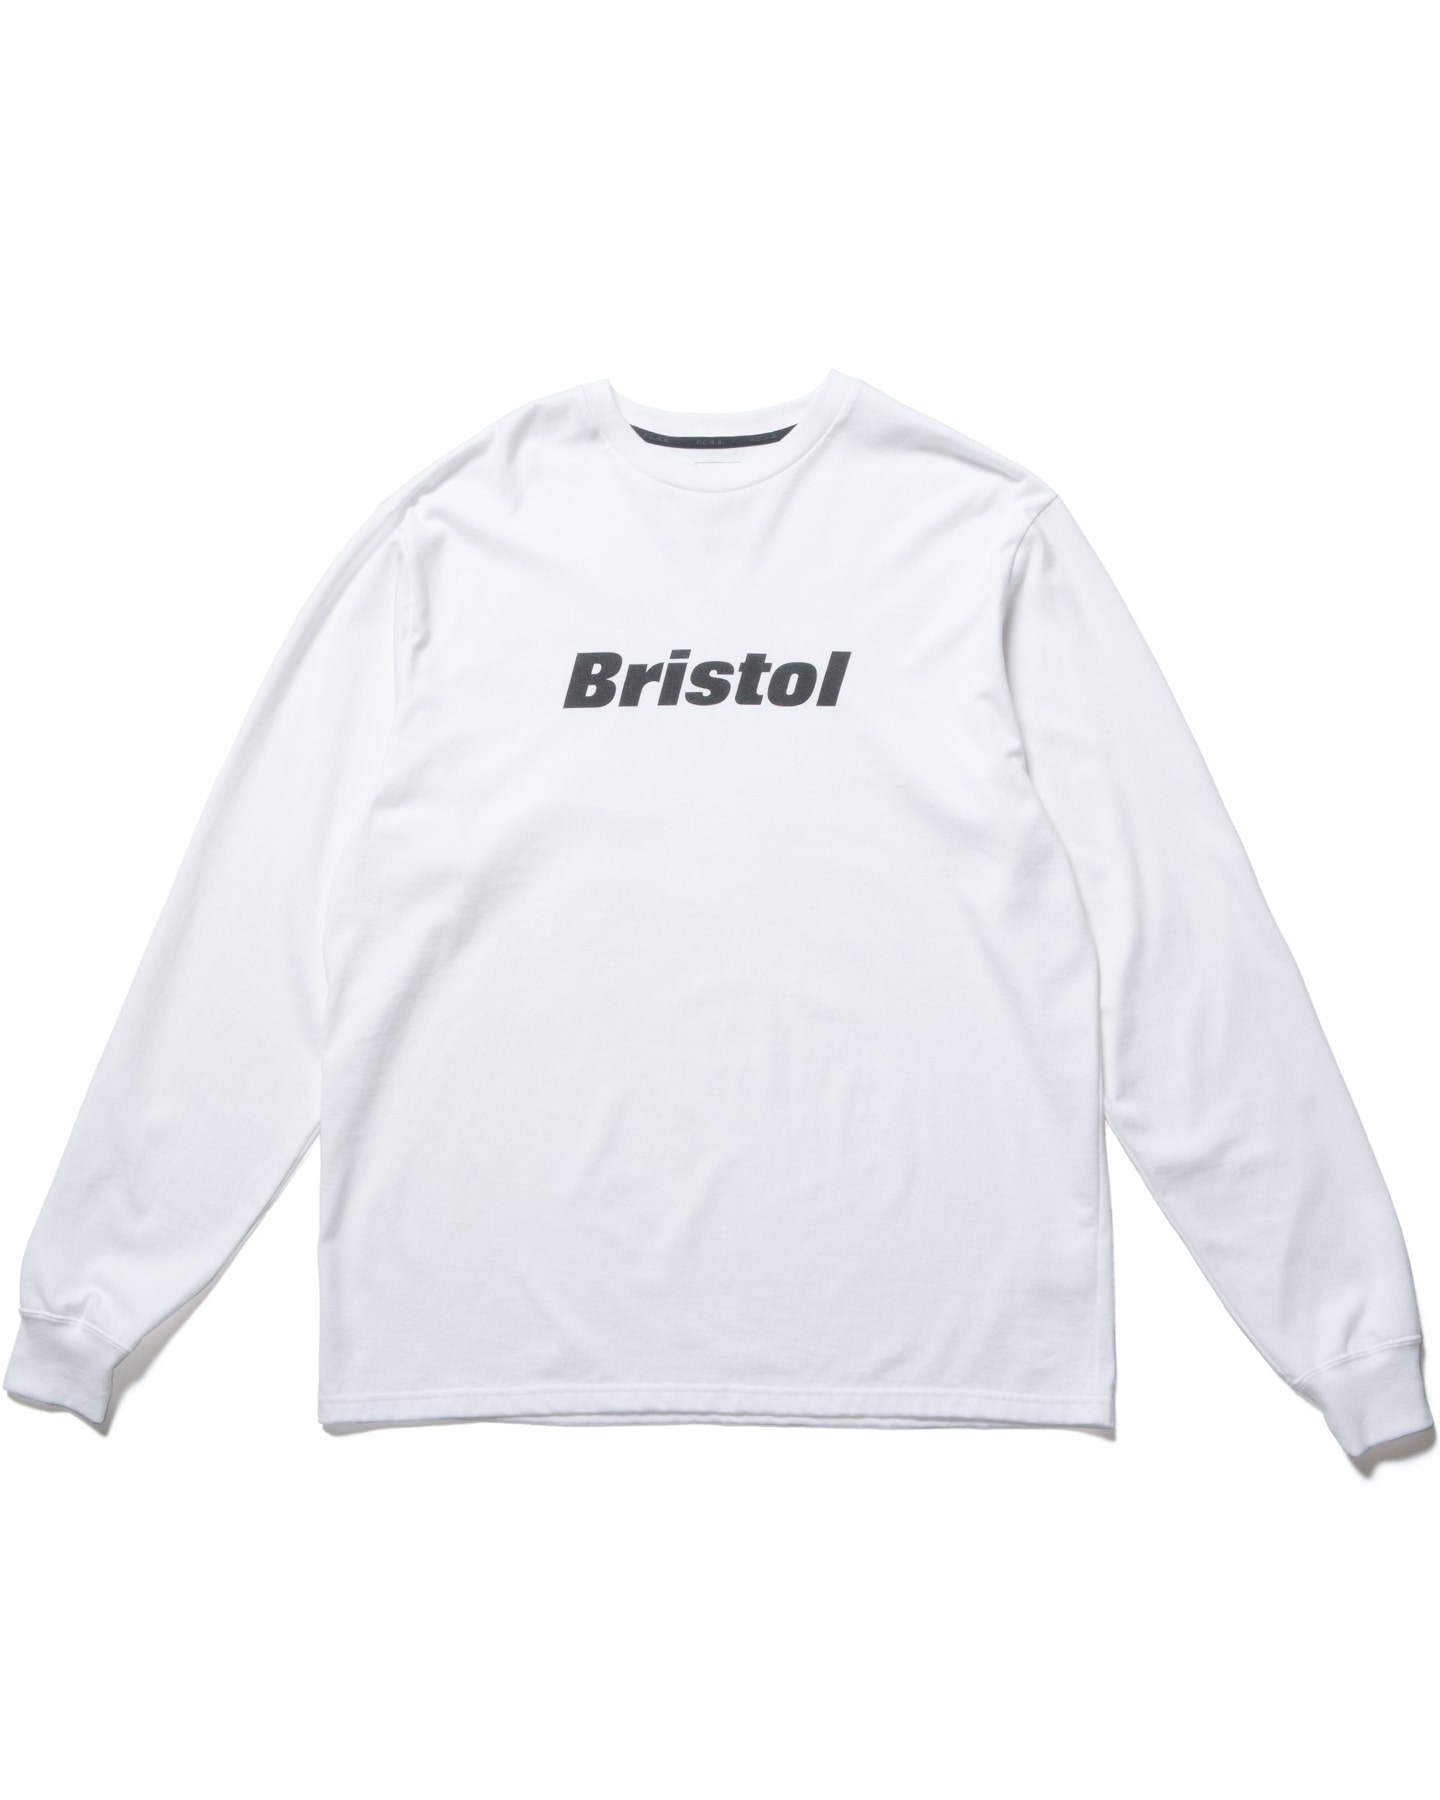 SOPH. | AUTHENTIC LOGO L/S RELAX FIT TEE(M WHITE):